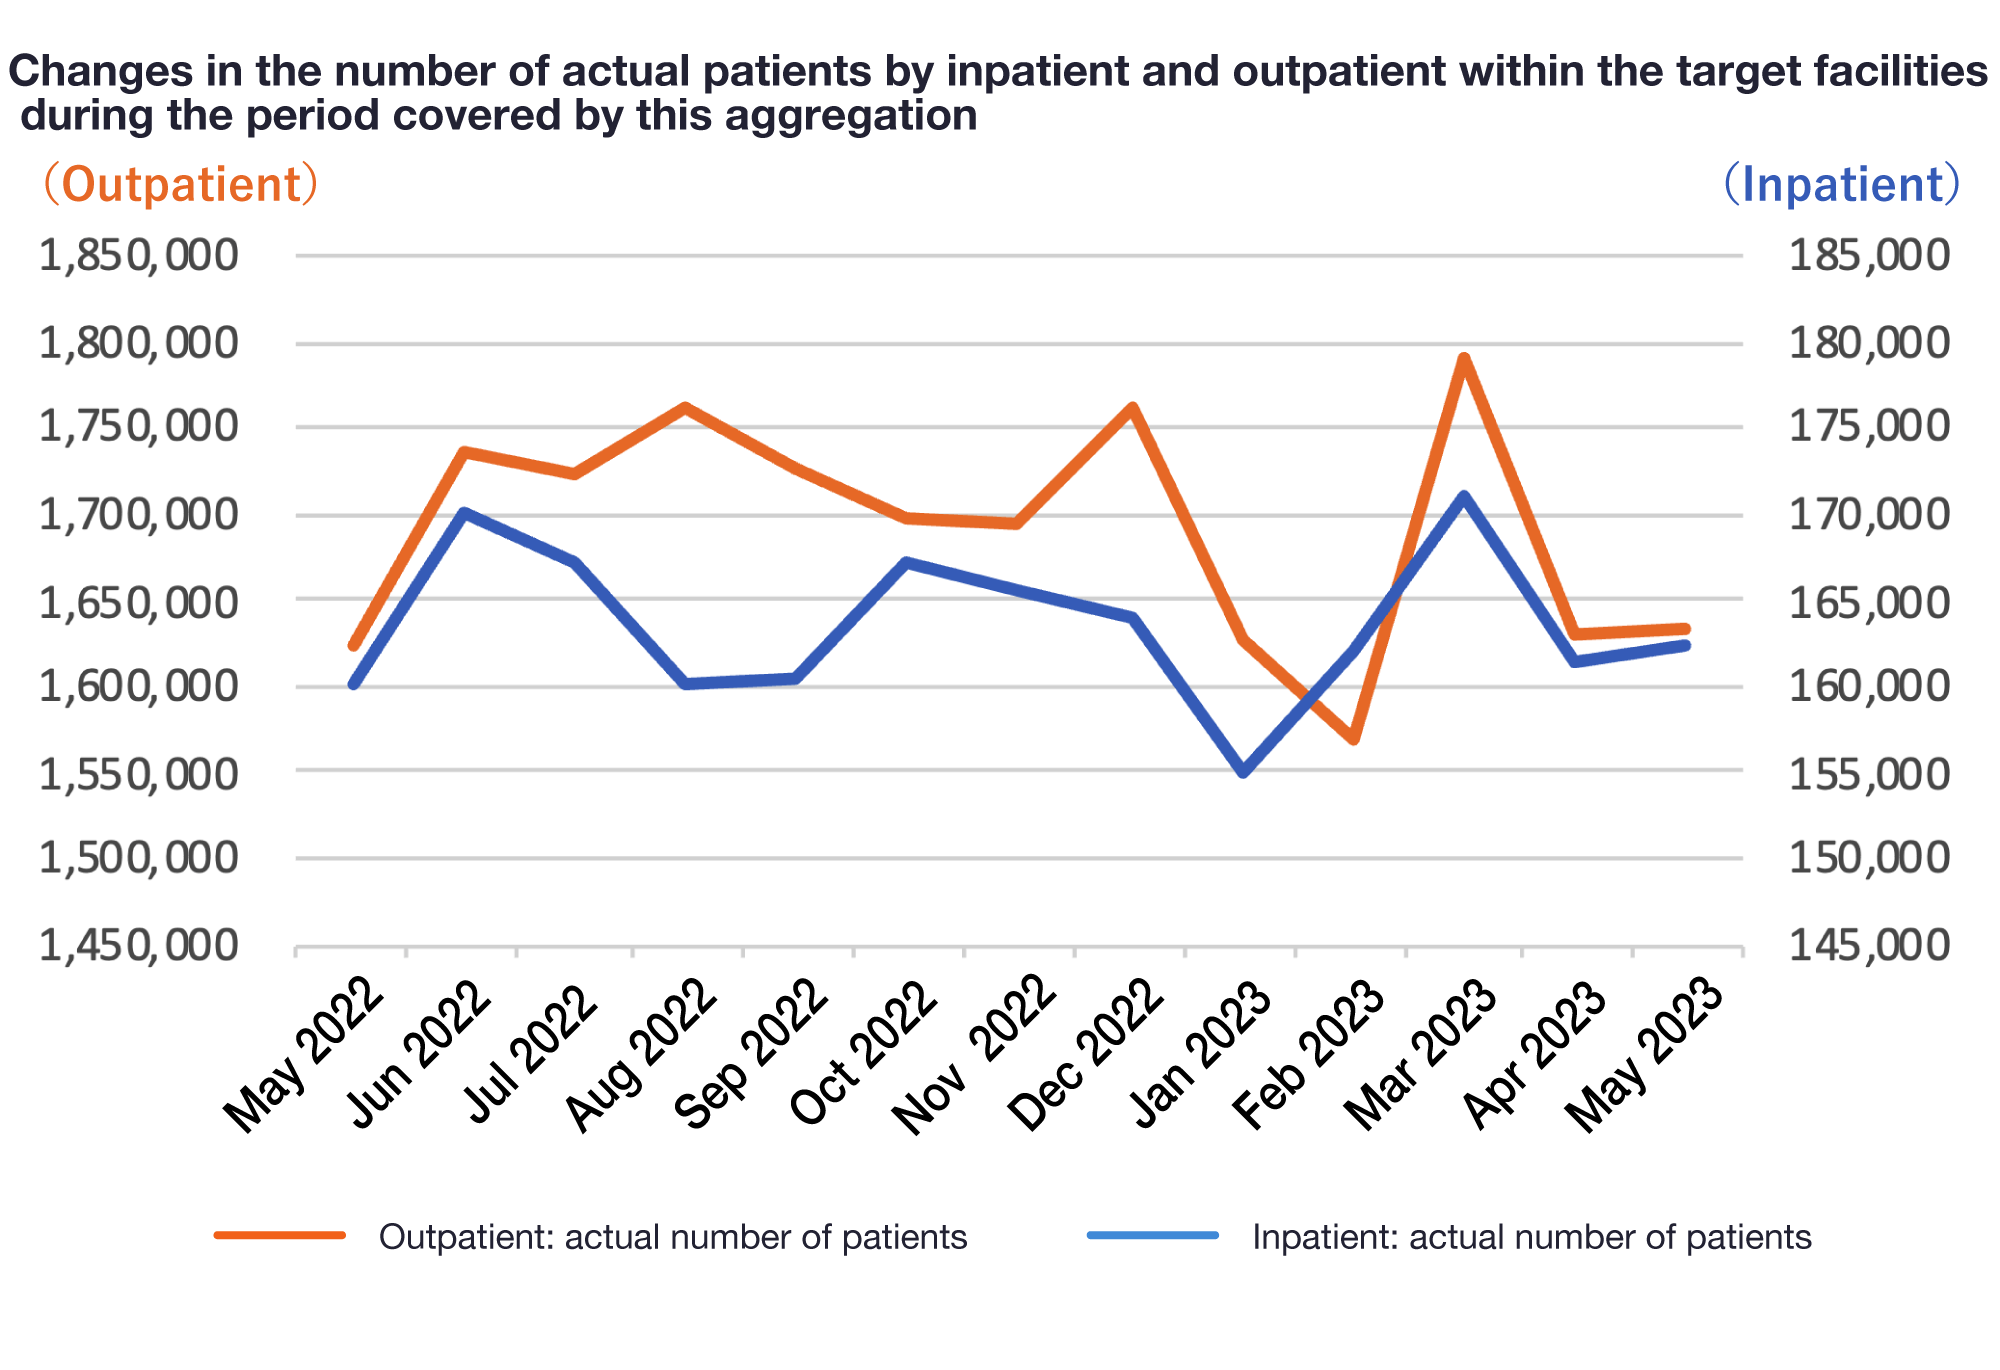 Changes in the number of actual patients by inpatient and outpatient within the target facilities during the period covered by this aggregation